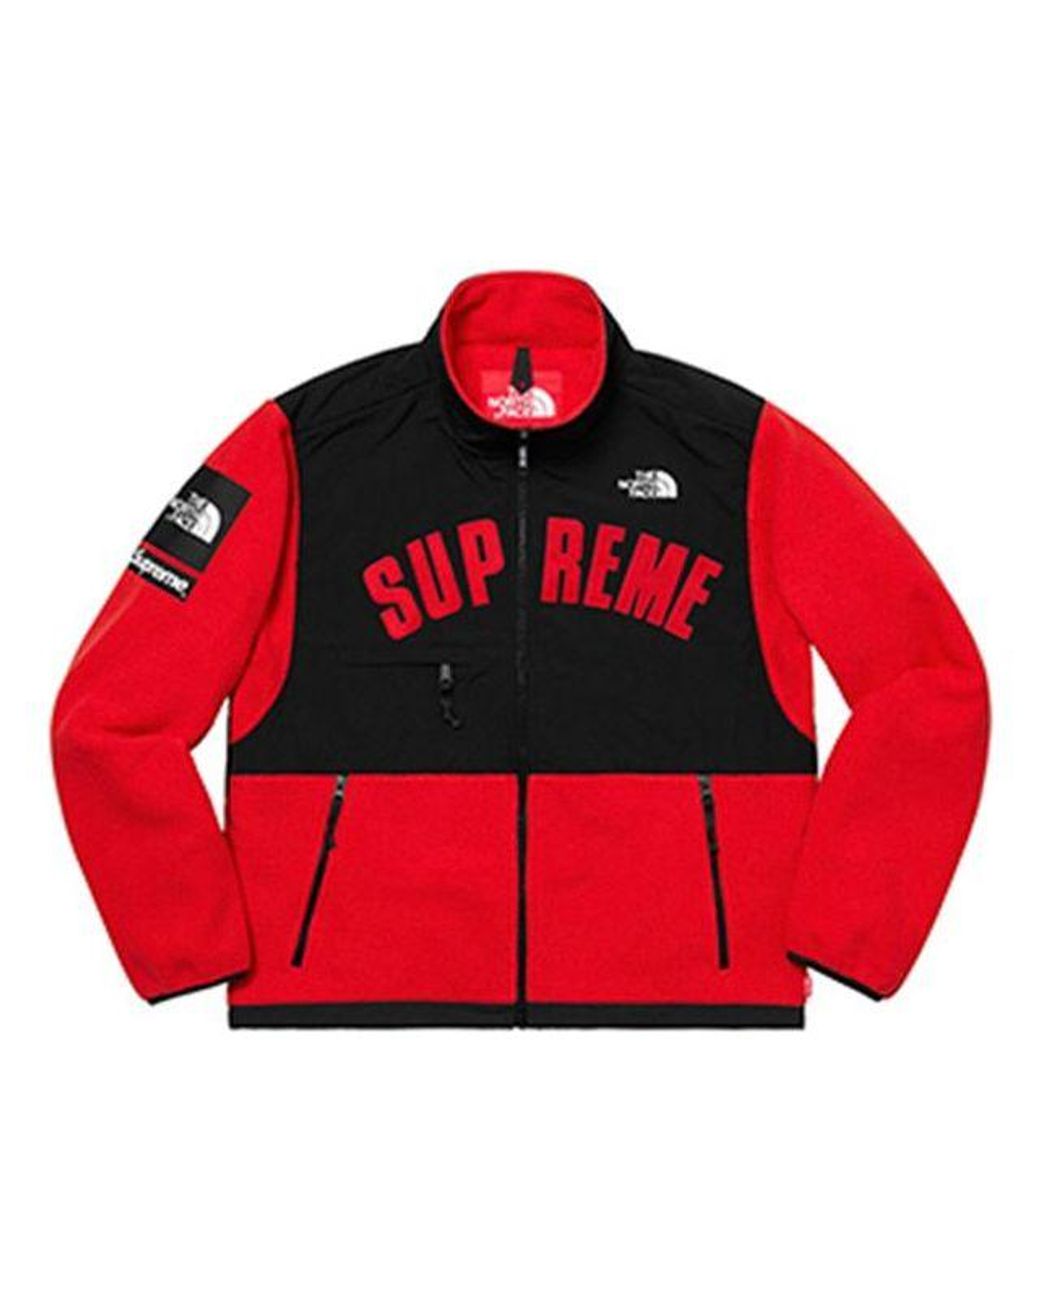 Supreme Ss19 X The North Face Arc Logo Denali Fleece Jacket in Red